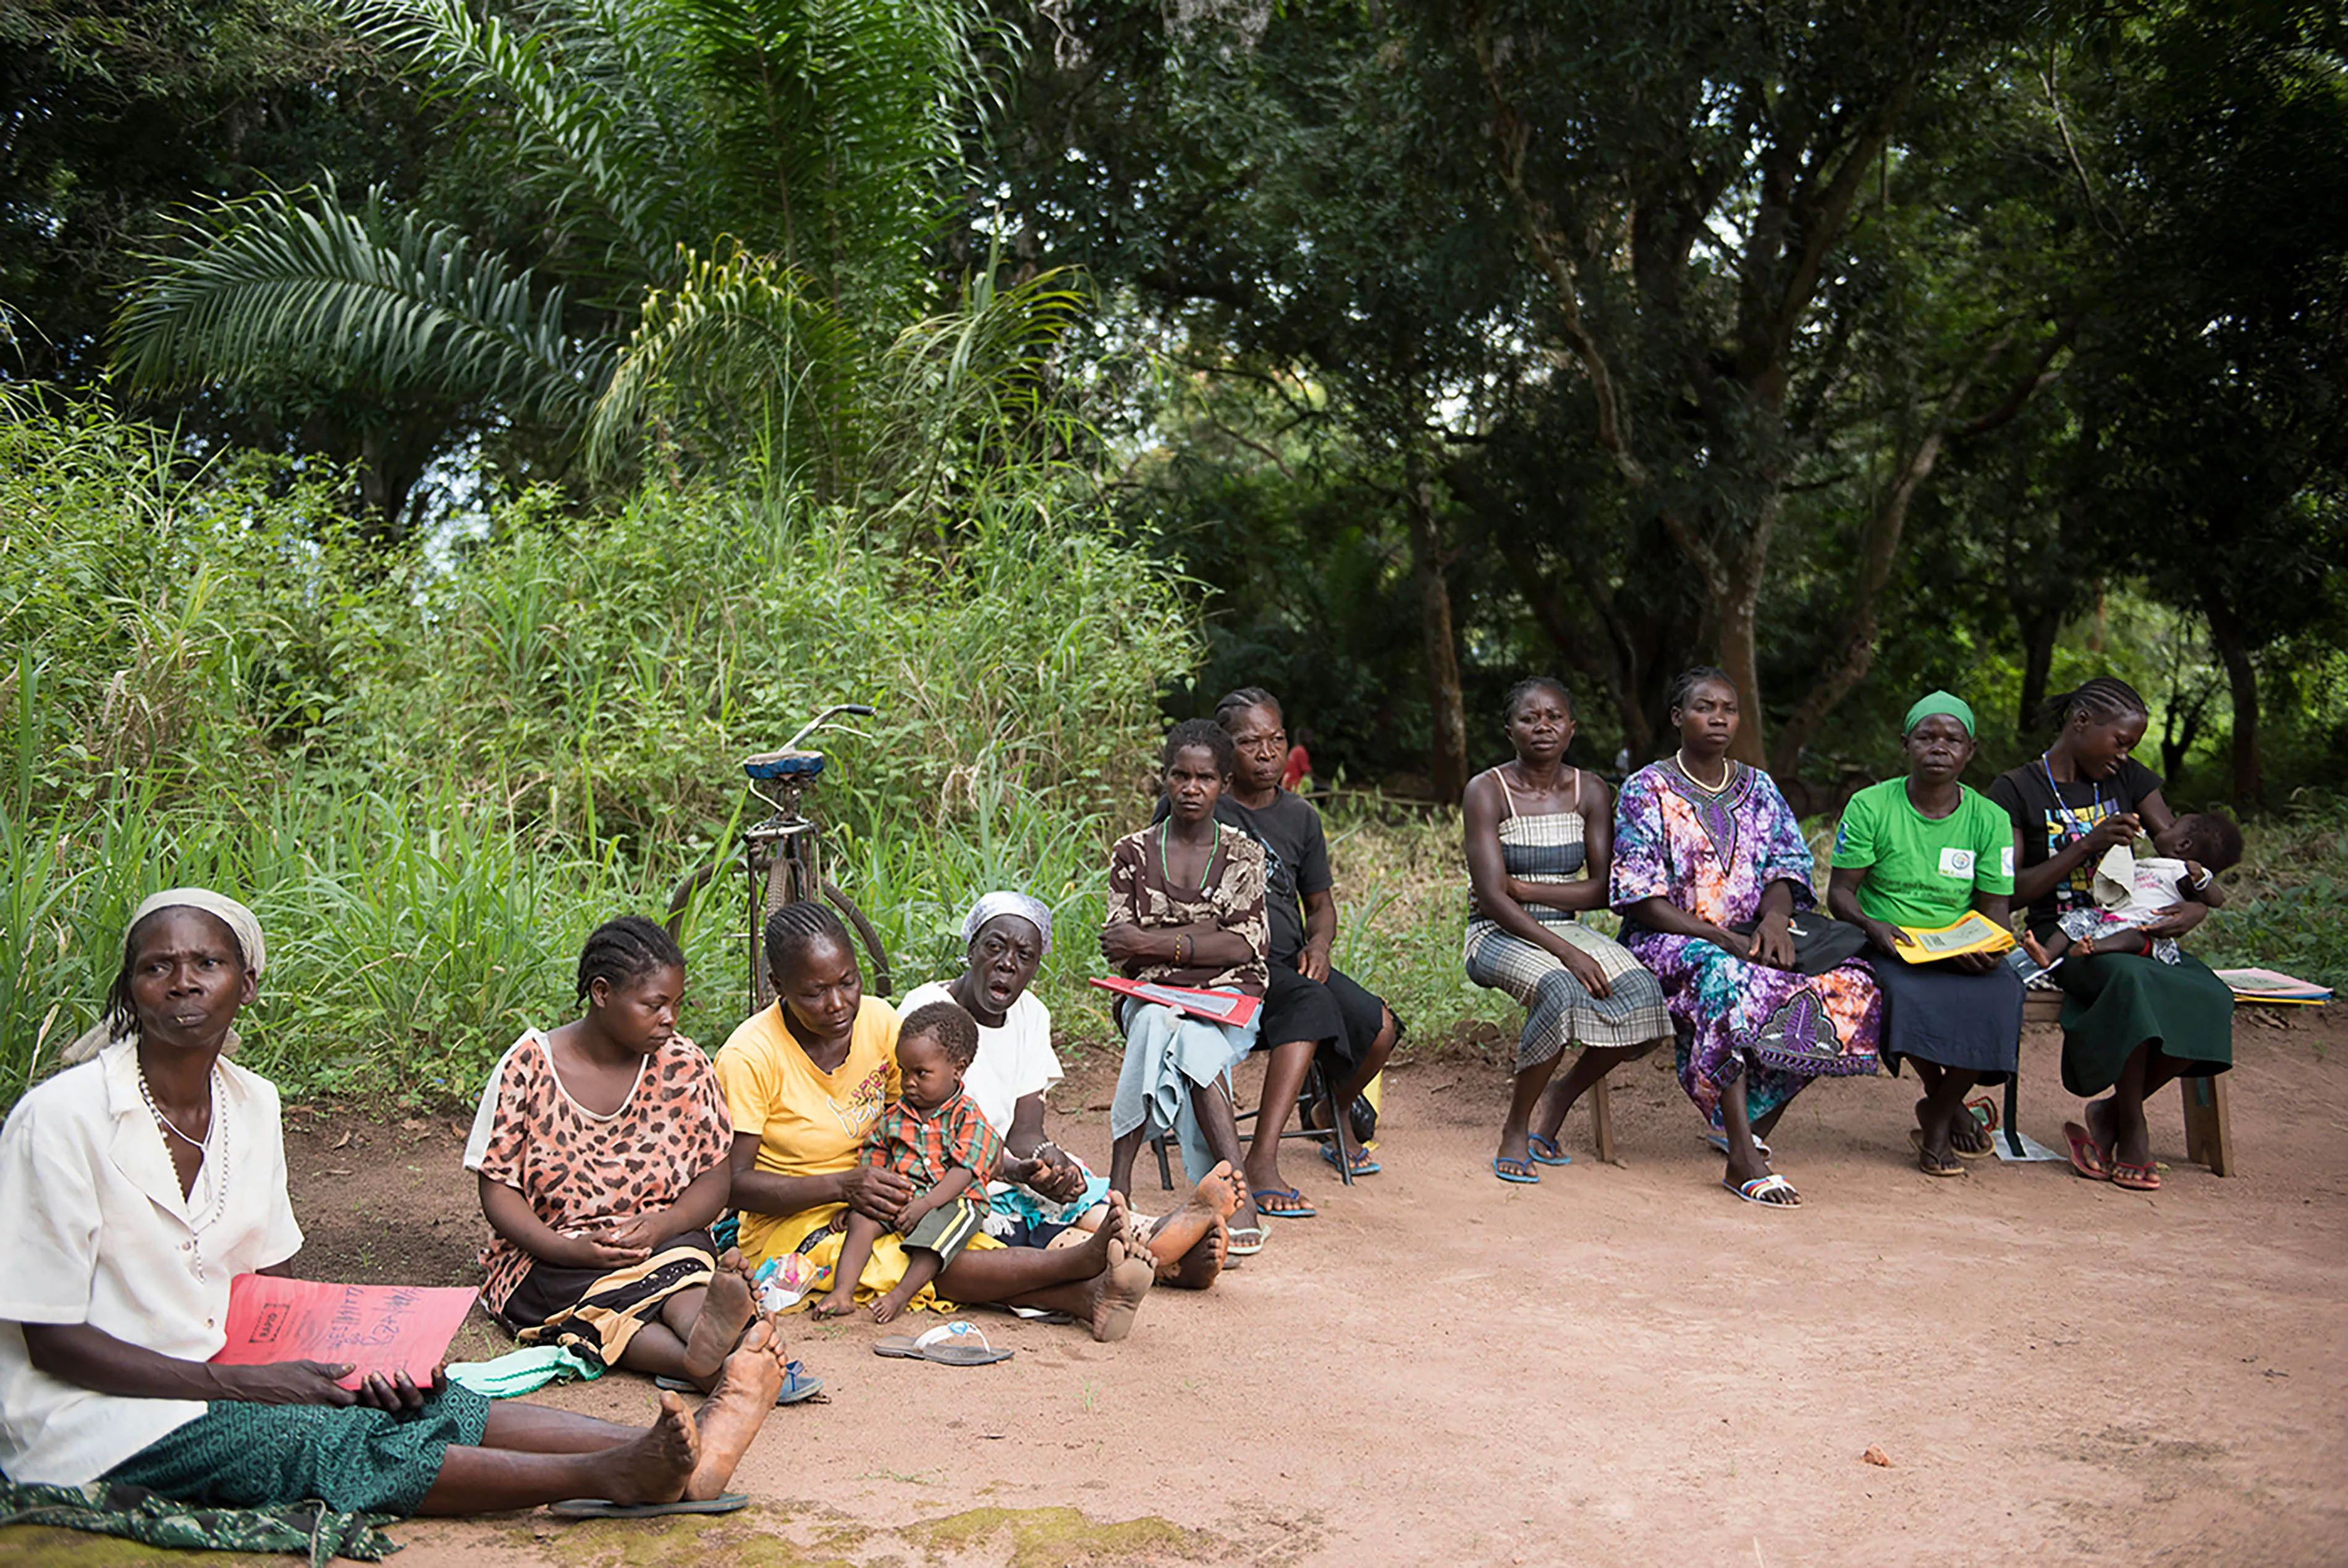 A group of ladies sit waiting for consultations, or to see the MSF medical doctors at an MSF mobile clinic site in Bodo, a village just outside Yambio, in Gbudwe State, South Sudan. Photograph by Charles Atiki Lomodong